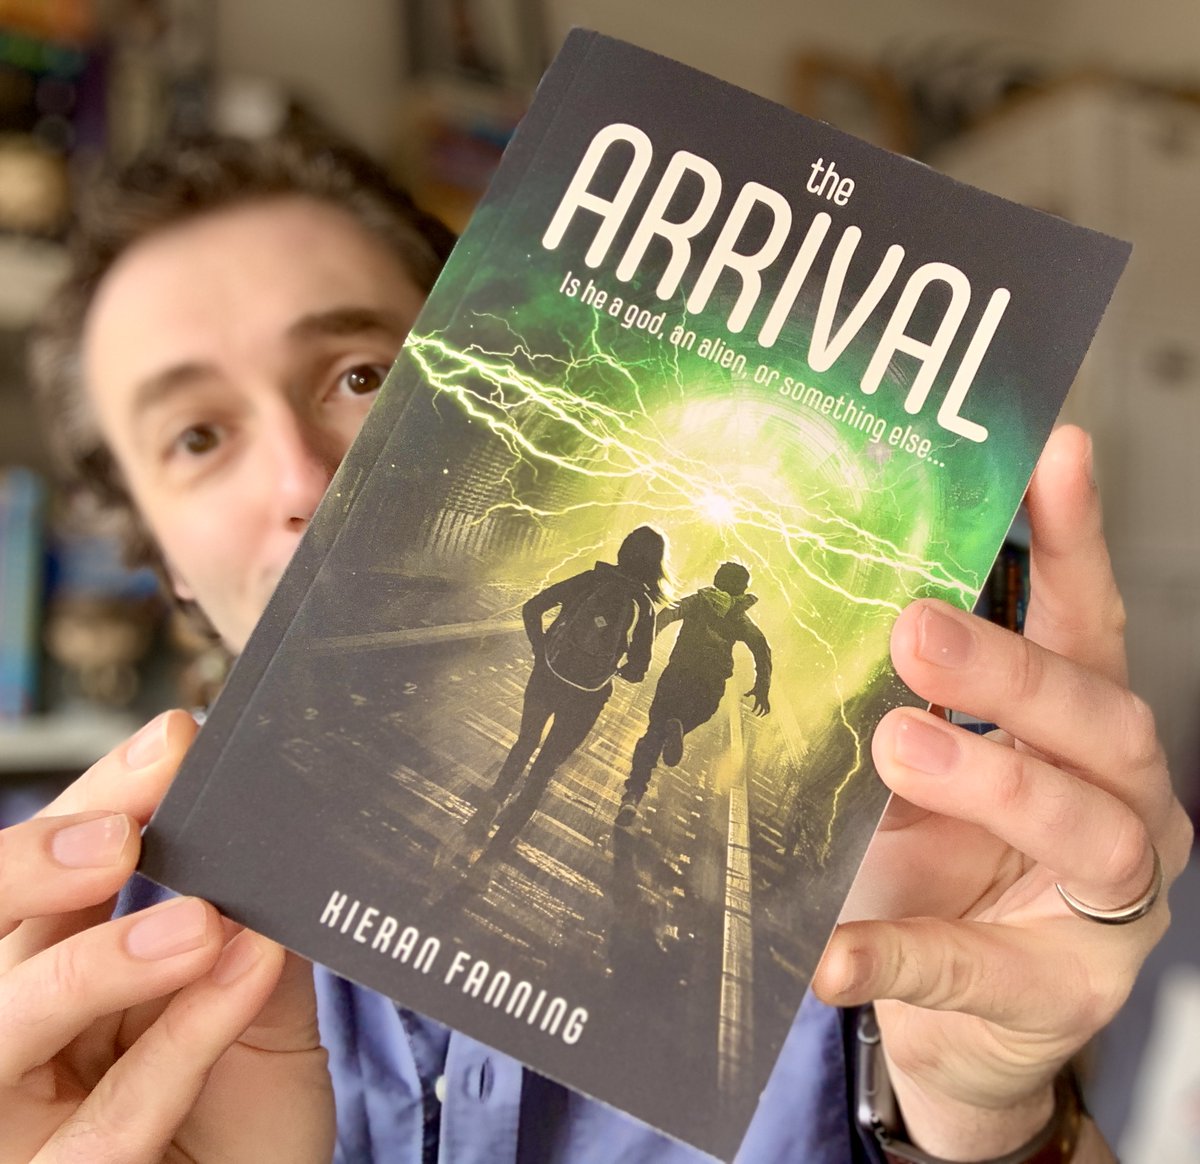 'The Arrival' is the new release from @KieranJFanning. I love Kieran's work. This looks and sounds like another corker. I can't wait to find out what's going on! Wishing Kieran - an absolutely top bloke - the best of luck with his new adventure. Book Cover by Jolua